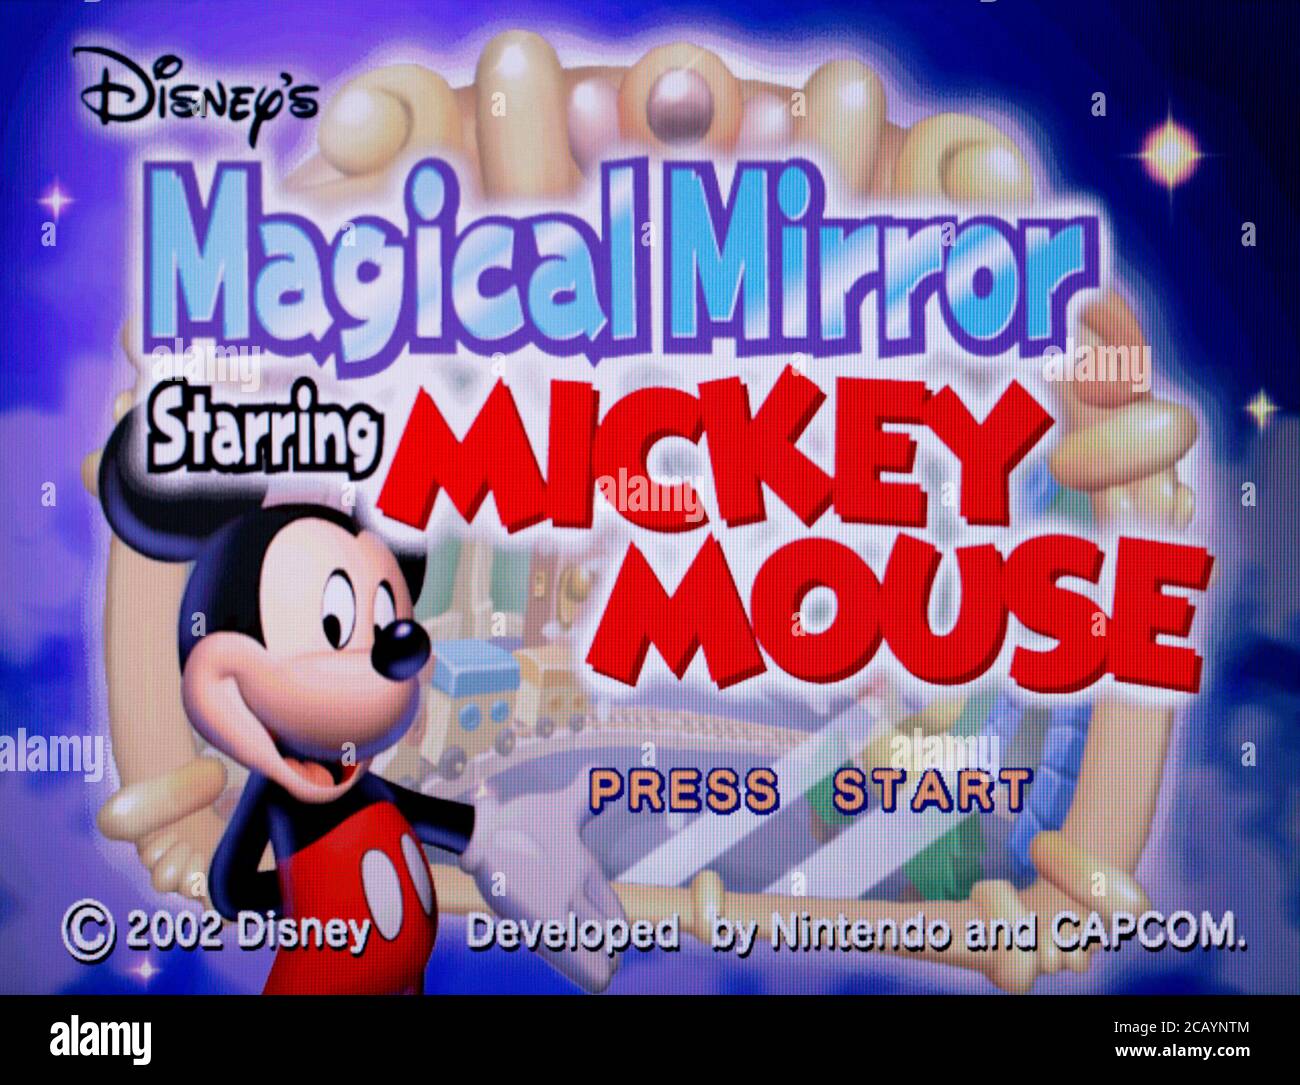 Disney's Magical Mirror starring Mickey Mouse. Disney s Magic Mirror Mickey Mouse. Nintendo Switch Magical Mirror starring Mickey Mouse. Disney s Magical Mirror starring Mickey Maps.